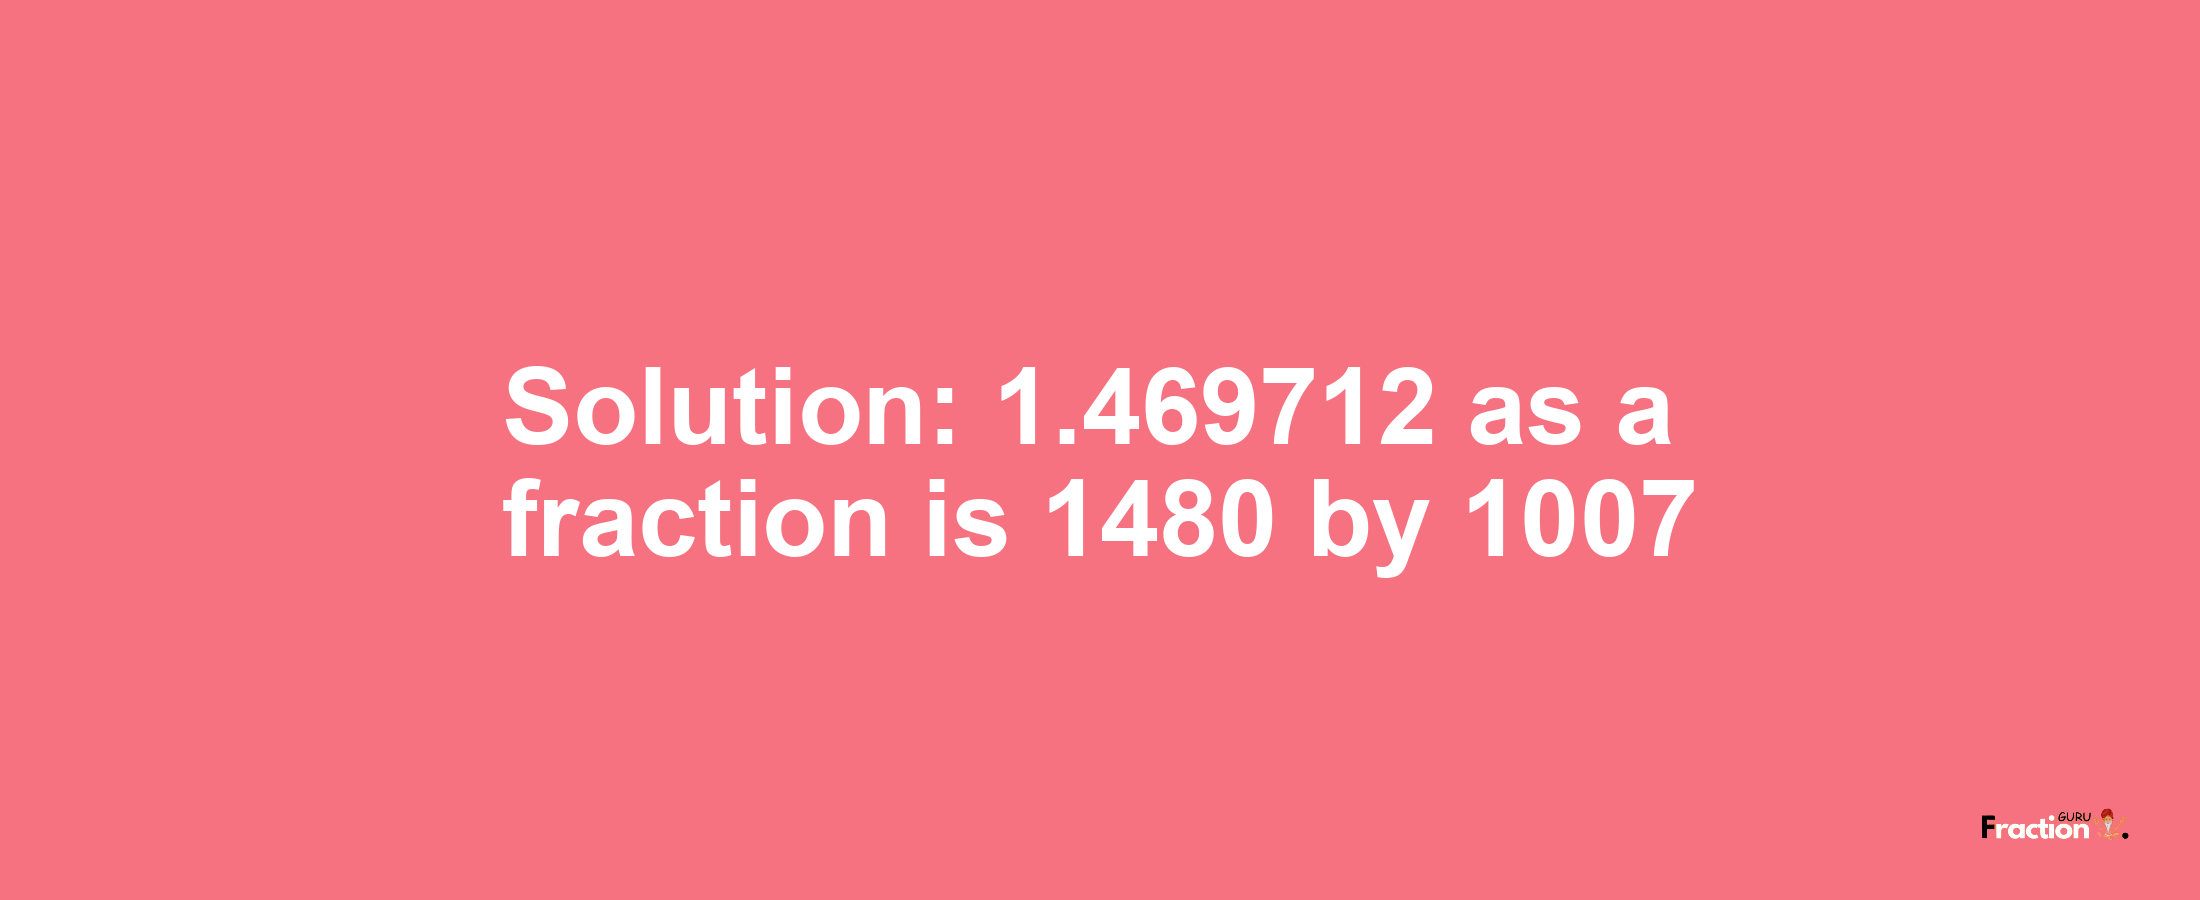 Solution:1.469712 as a fraction is 1480/1007